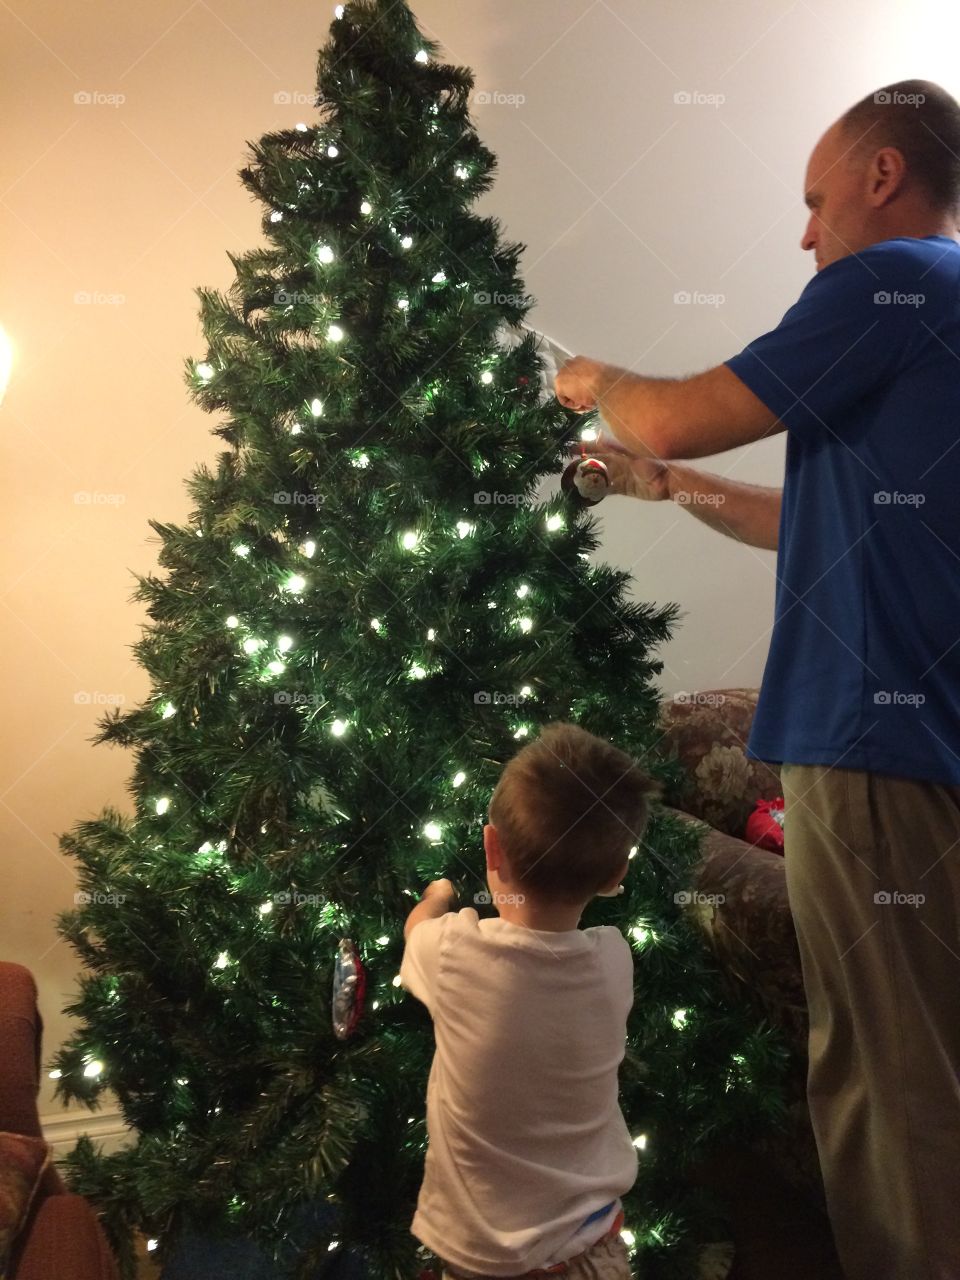 Daddy and son decorating the Christmas tree